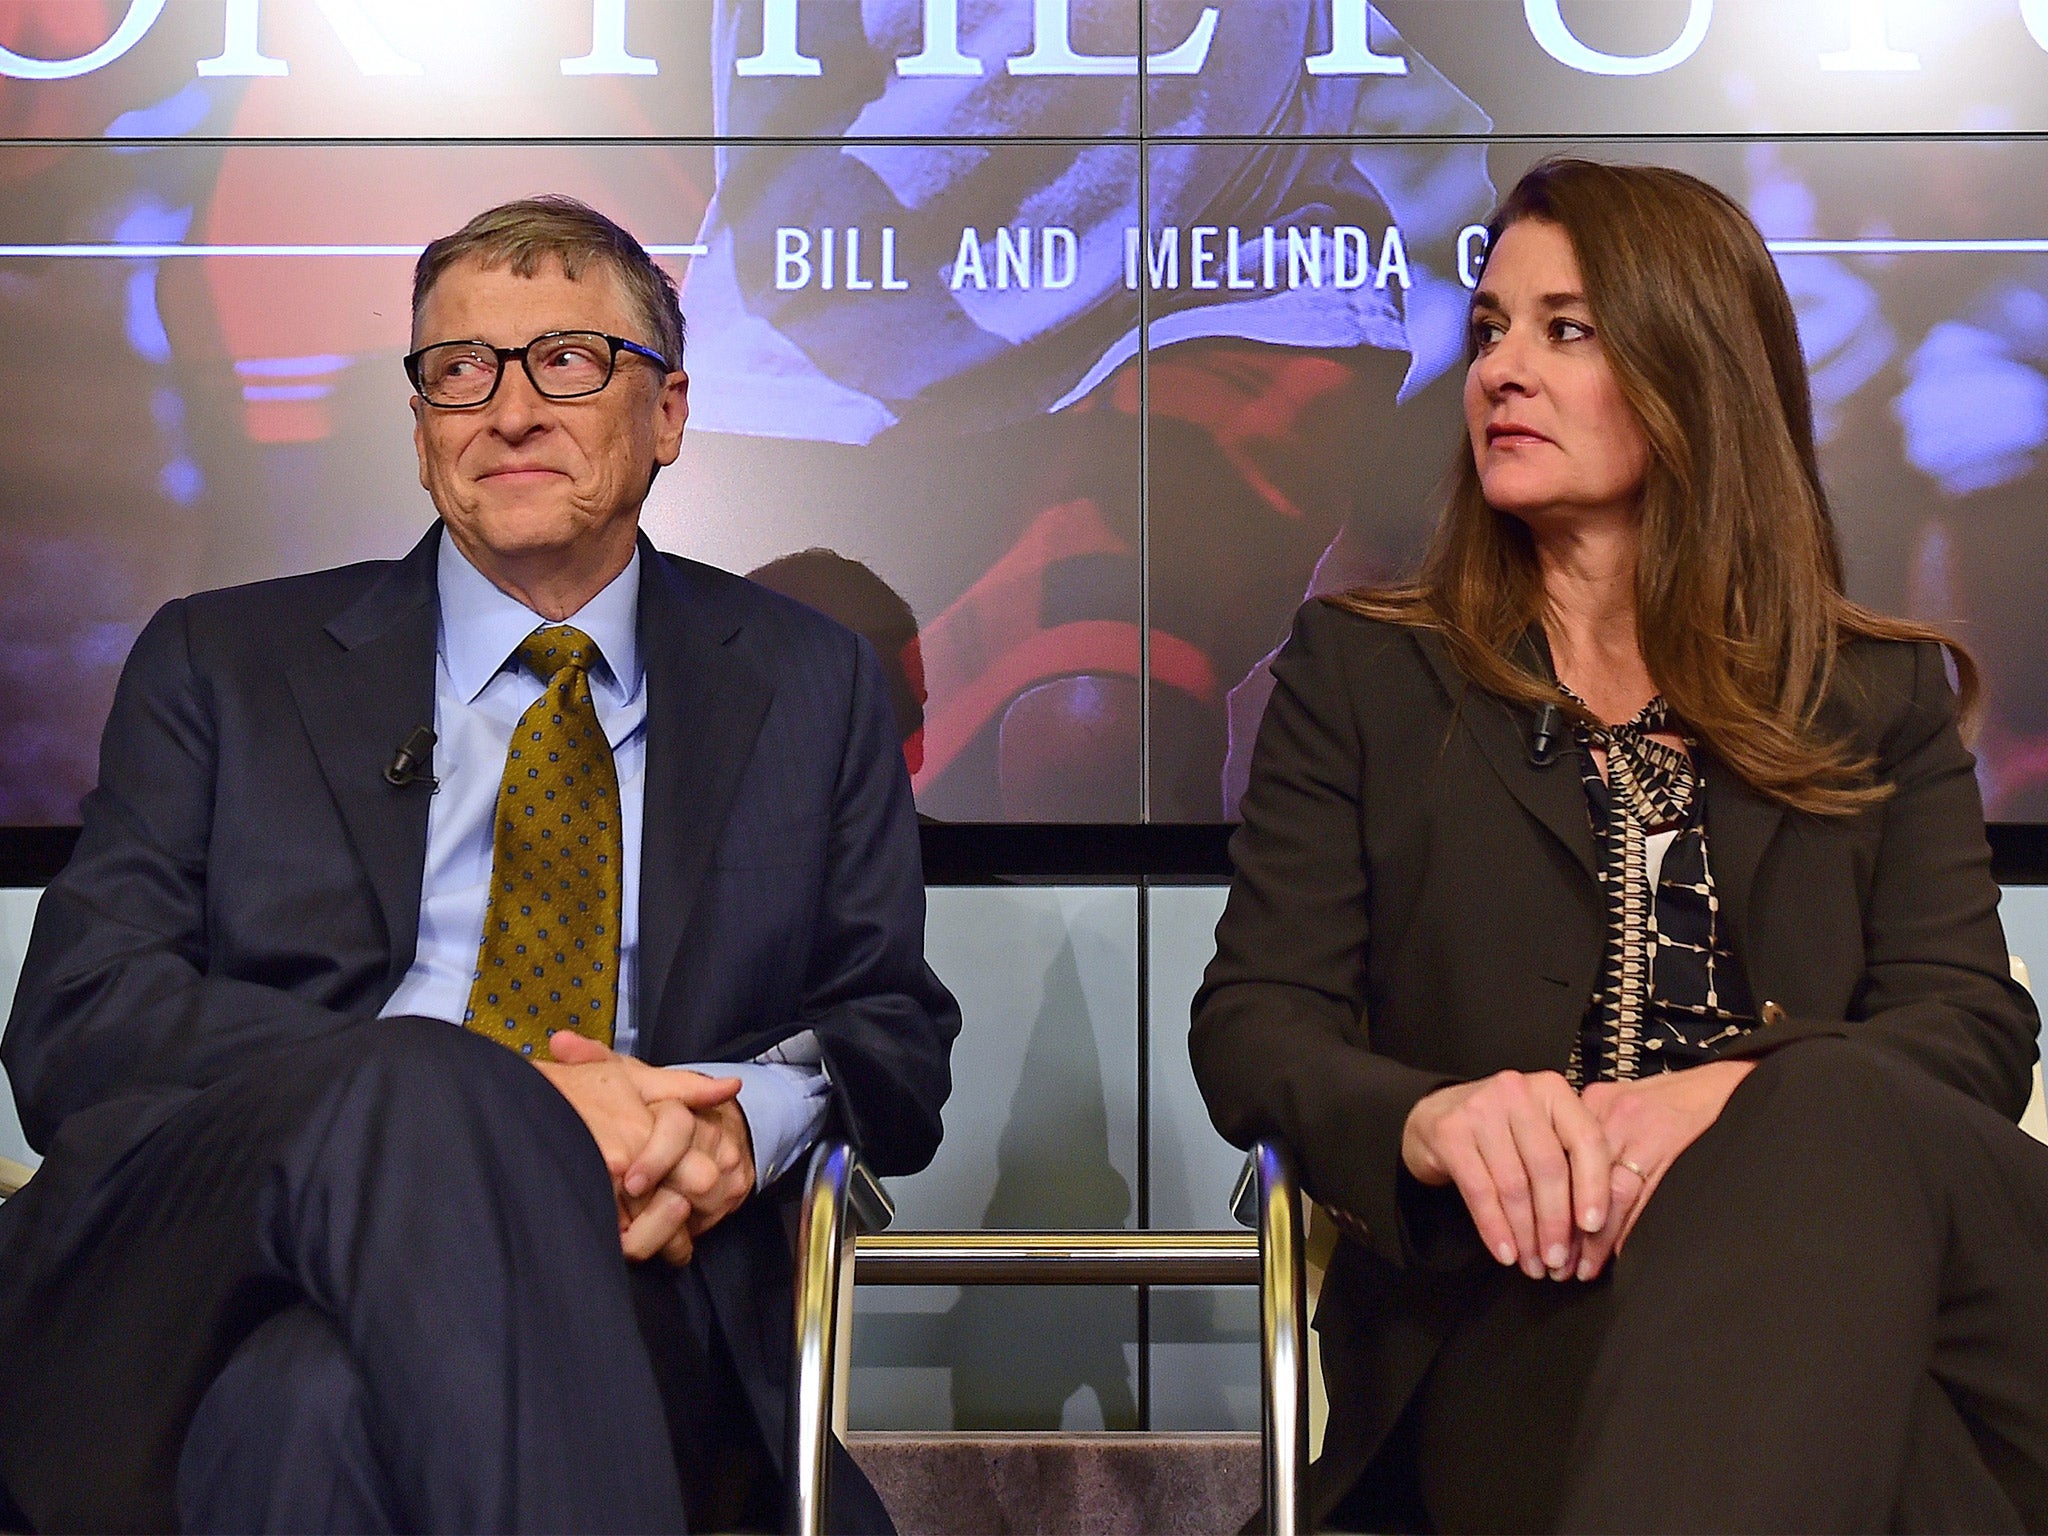 Bill and Melinda Gates' foundation is accused of promoting private healthcare concerns (Getty)